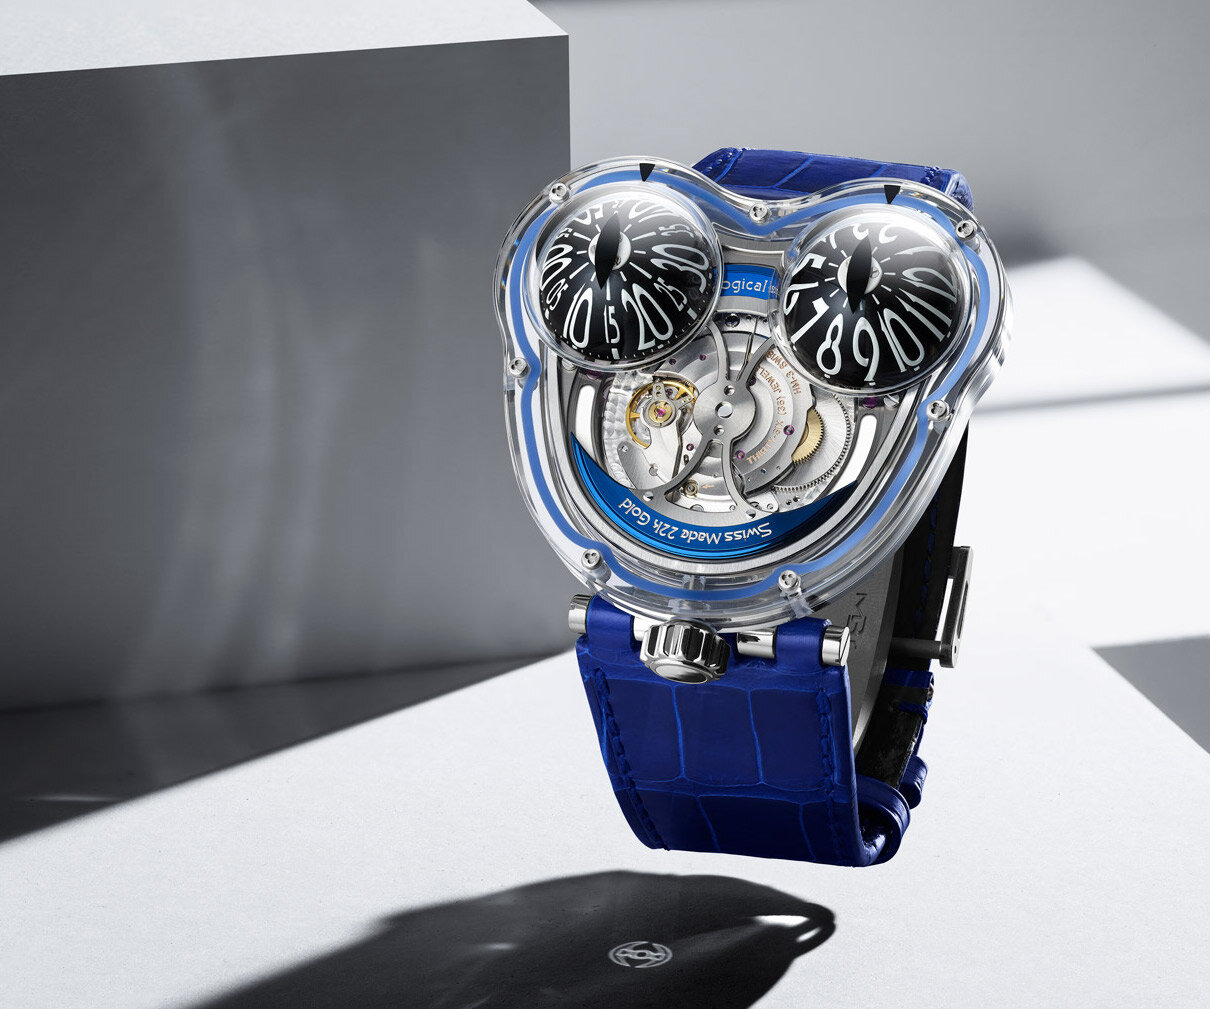 MB&amp;F HM3 Frog X 10th anniversary edition with Rayform technology applied to the crown, reflecting the MB&amp;F battle-axe